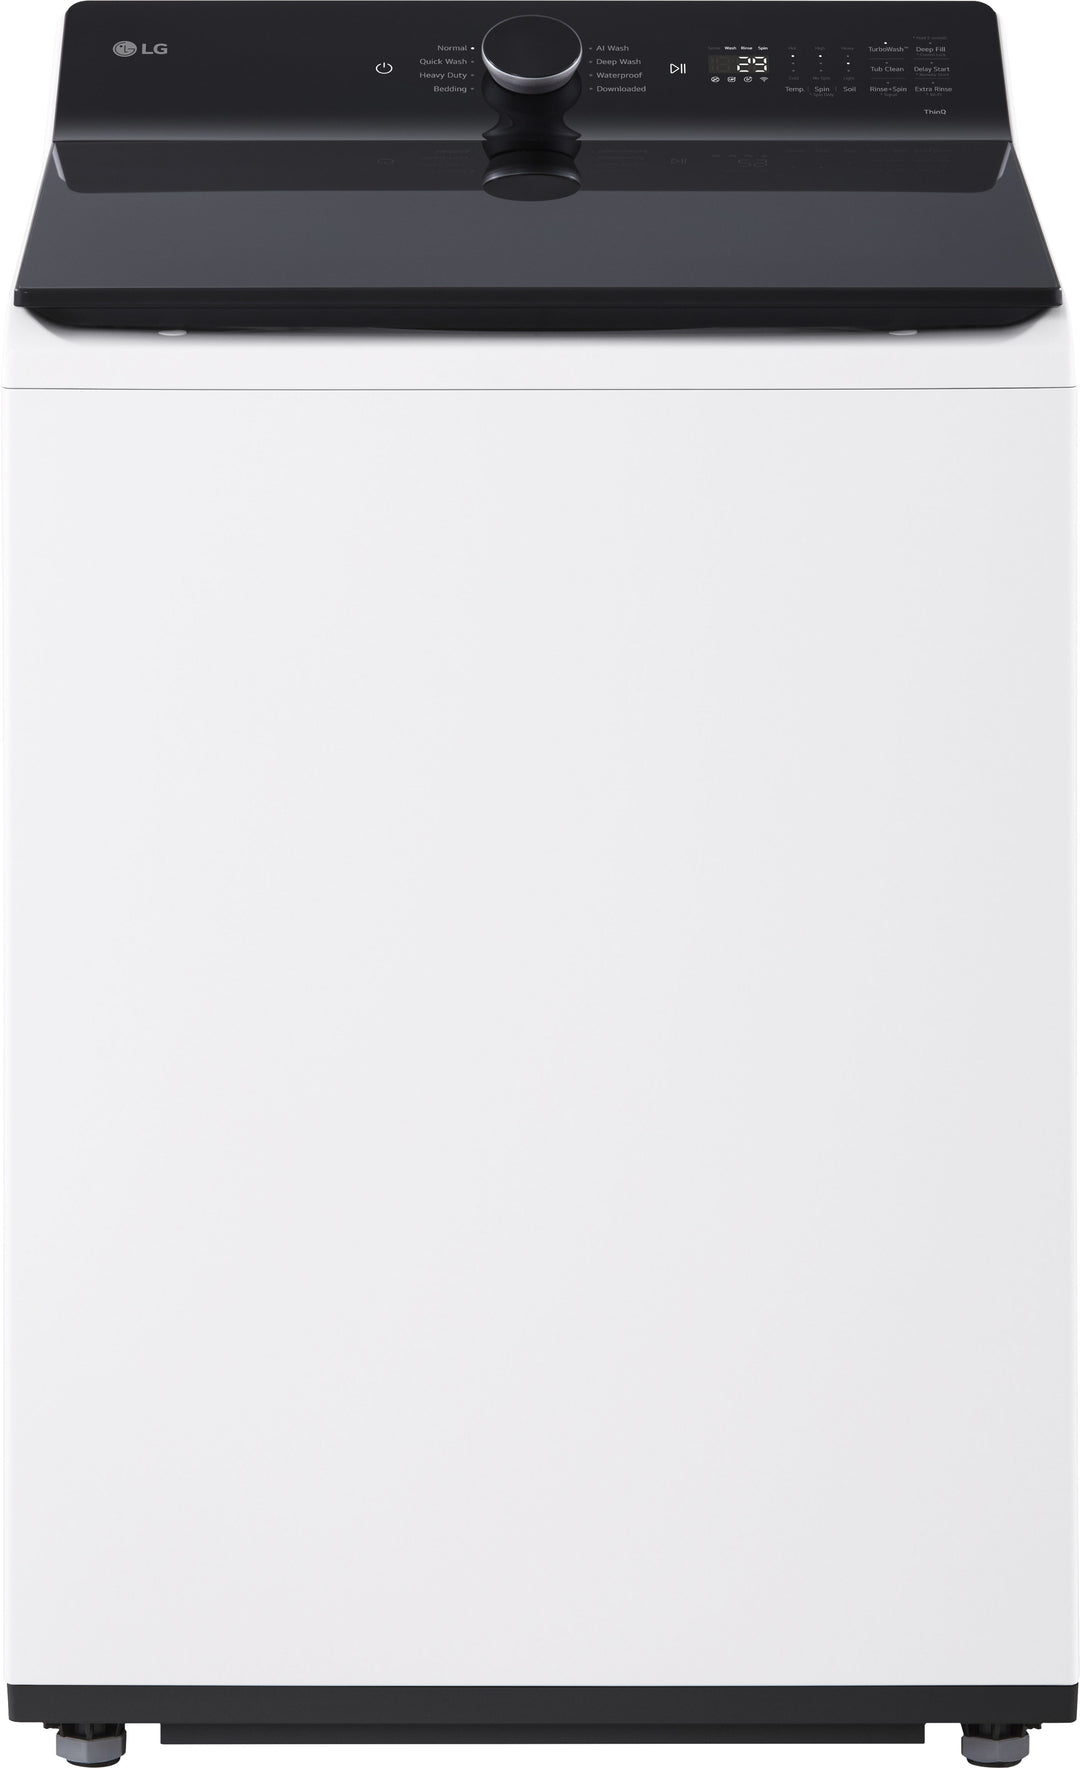 LG - 5.5 Cu. Ft. High Efficiency Smart Top Load Washer with EasyUnload - Alpine White_0